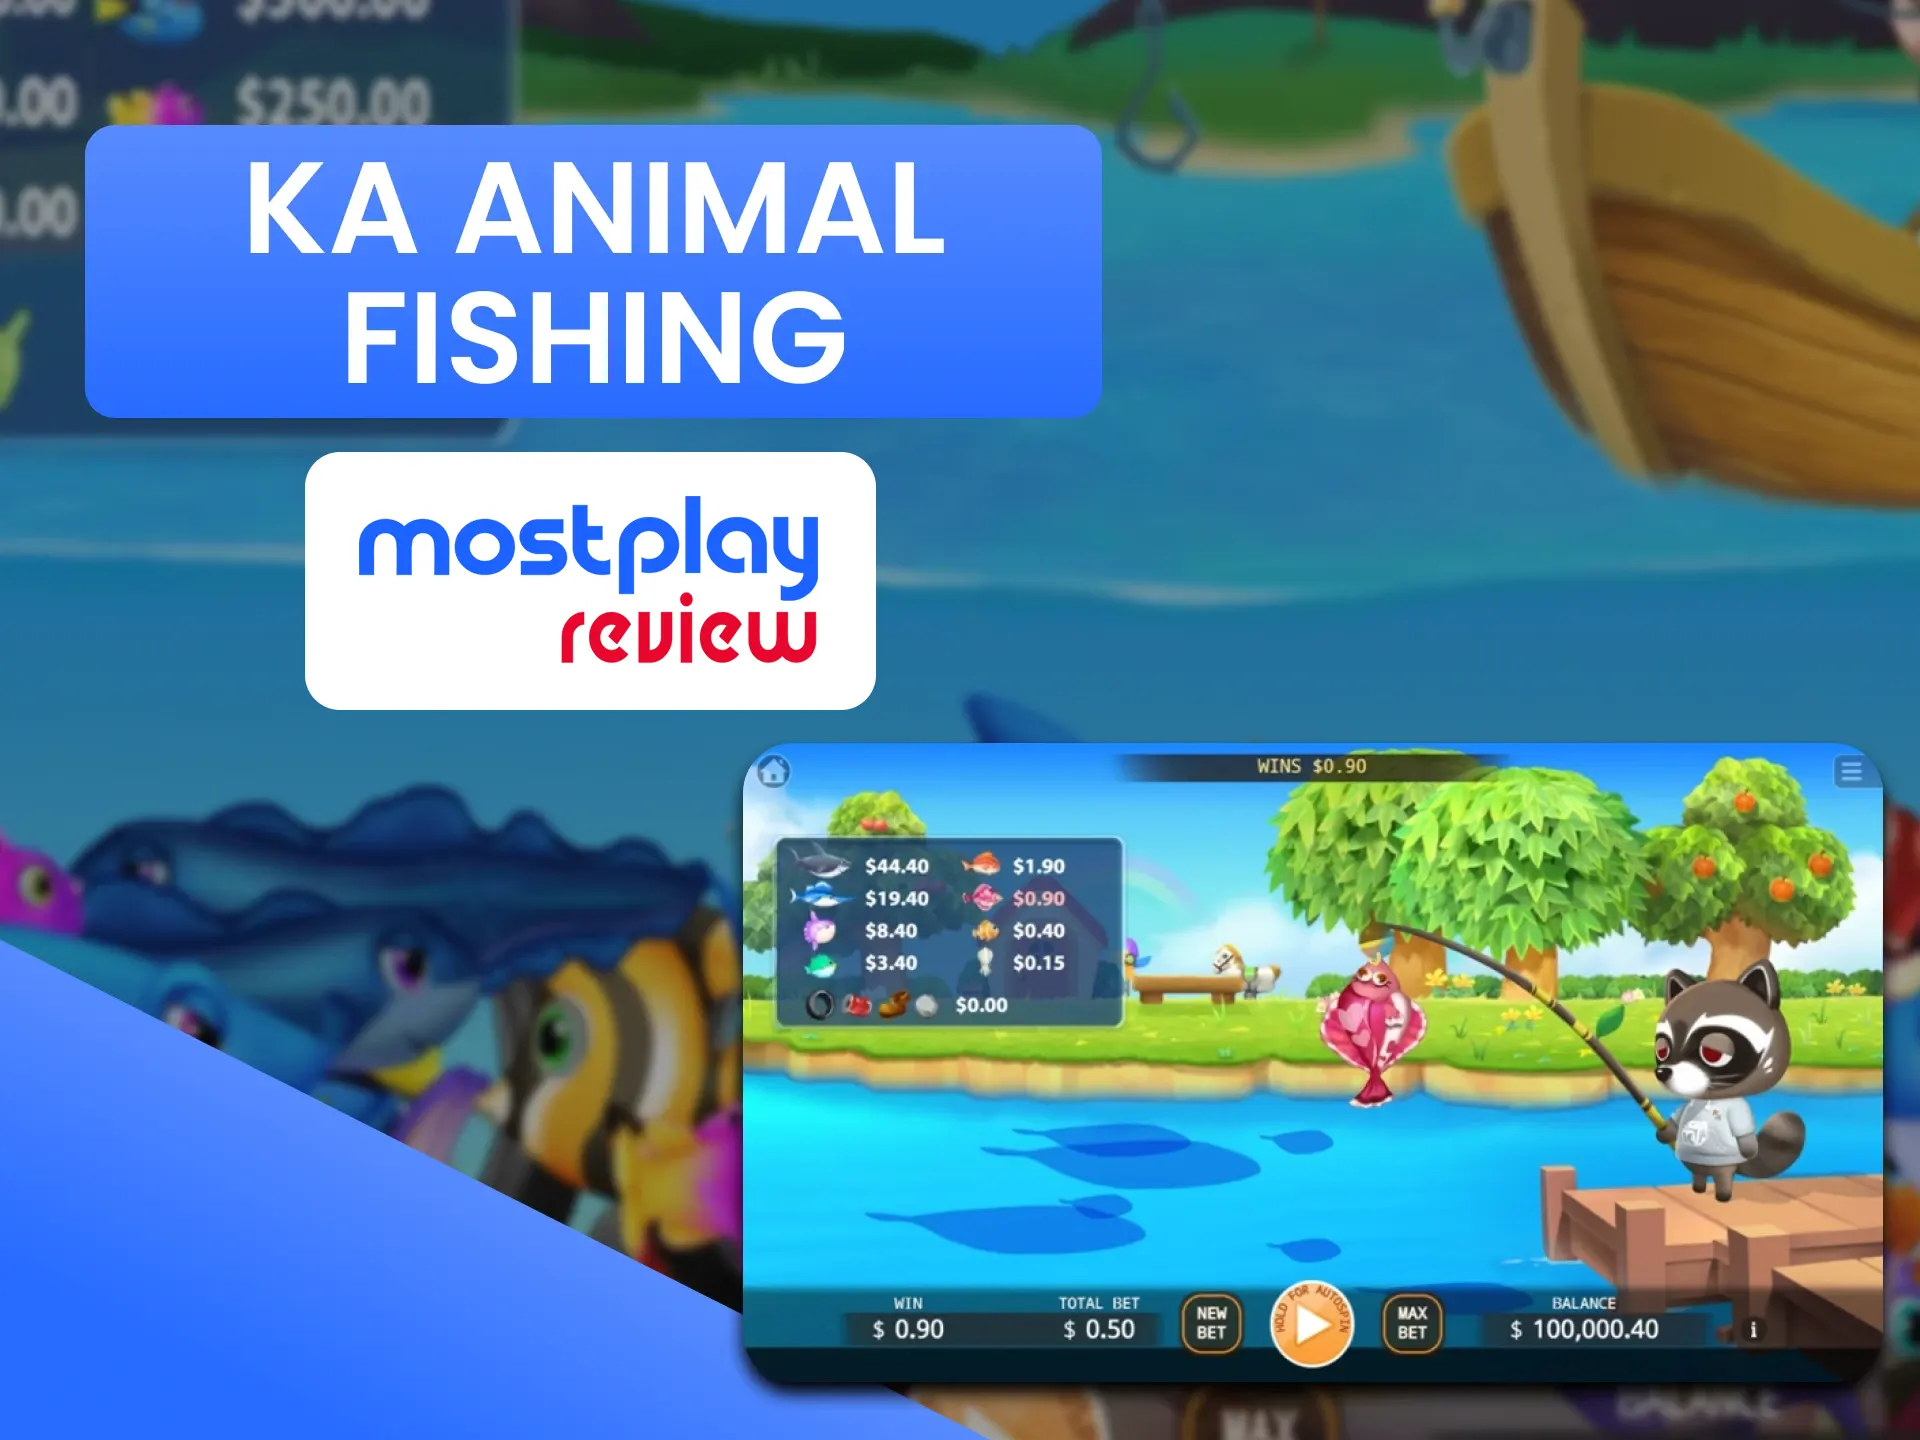 Play the Animal Fishing game on the special Mostplay page.